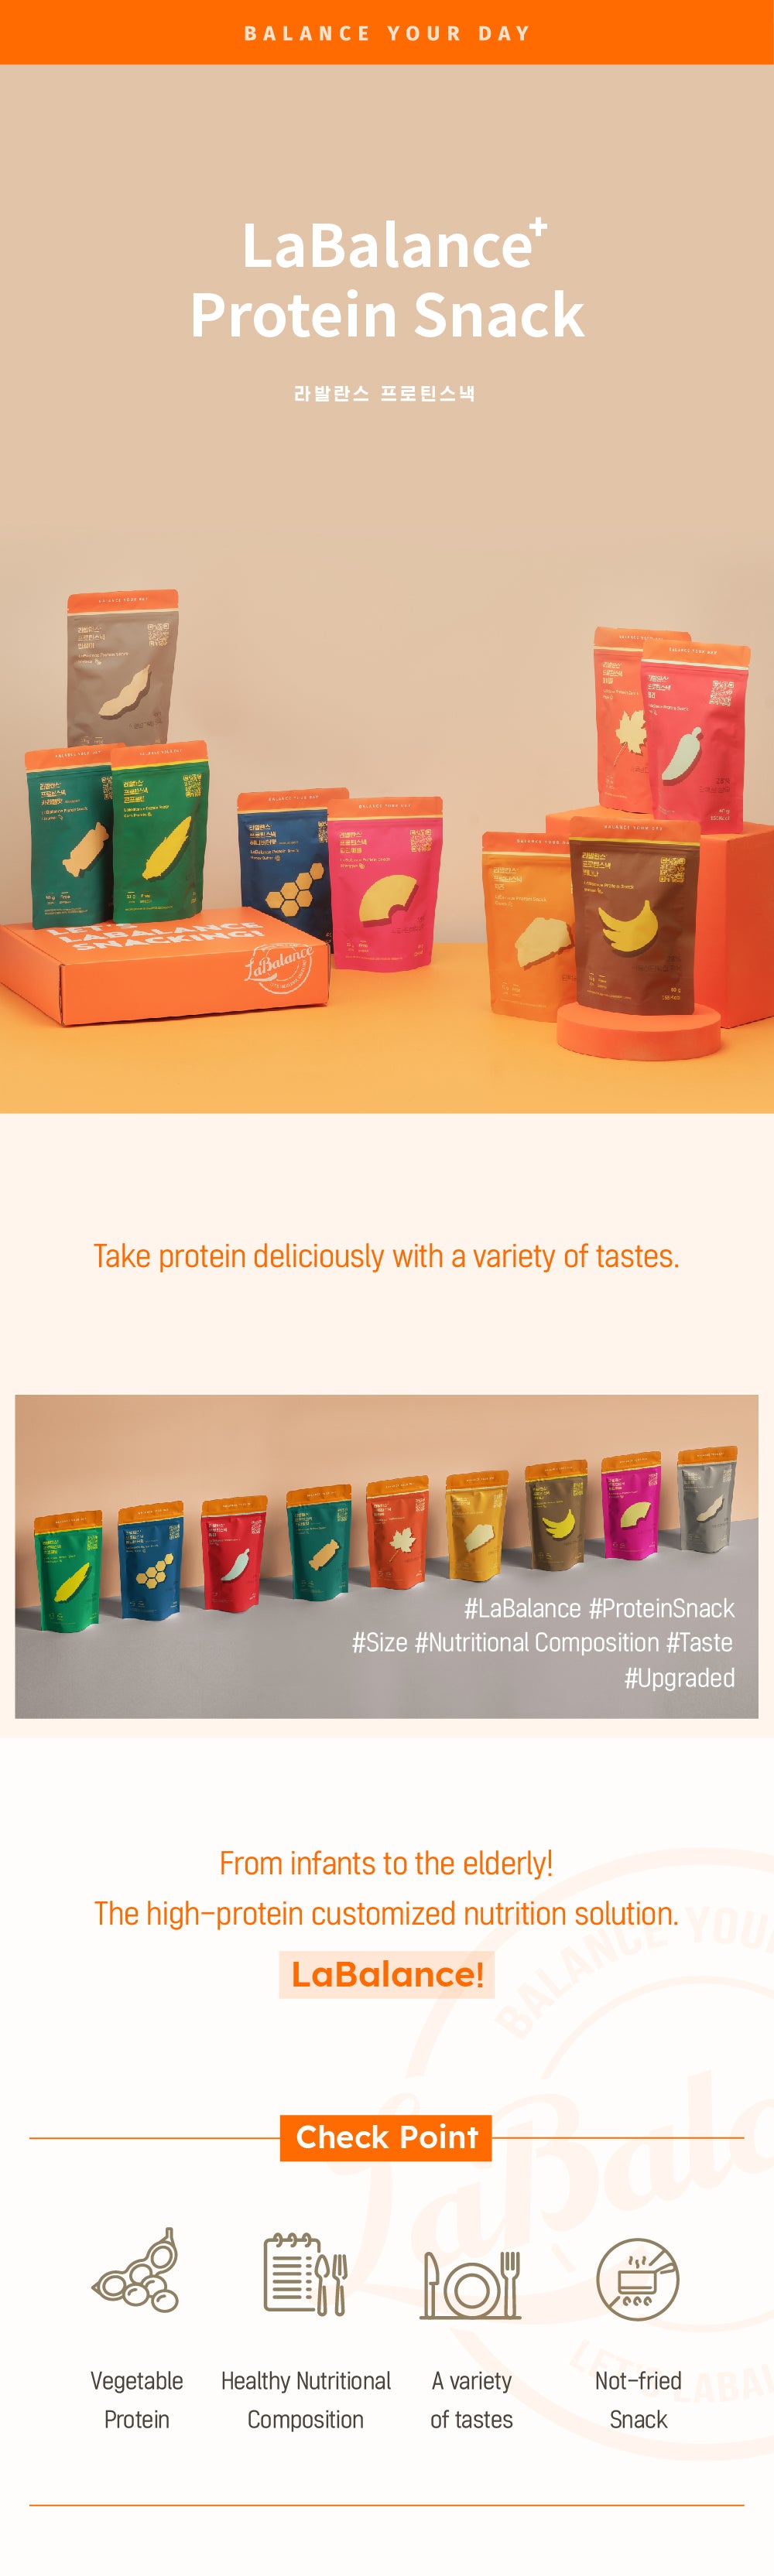 Labalance Protein Snack Set 9 Tastes | Injeolmi, Pineapple, Banana,  Honey butter, Caramel, Chili, Maple,  Corn Protein, Cheese 40g | Non-fried, high-protein snack